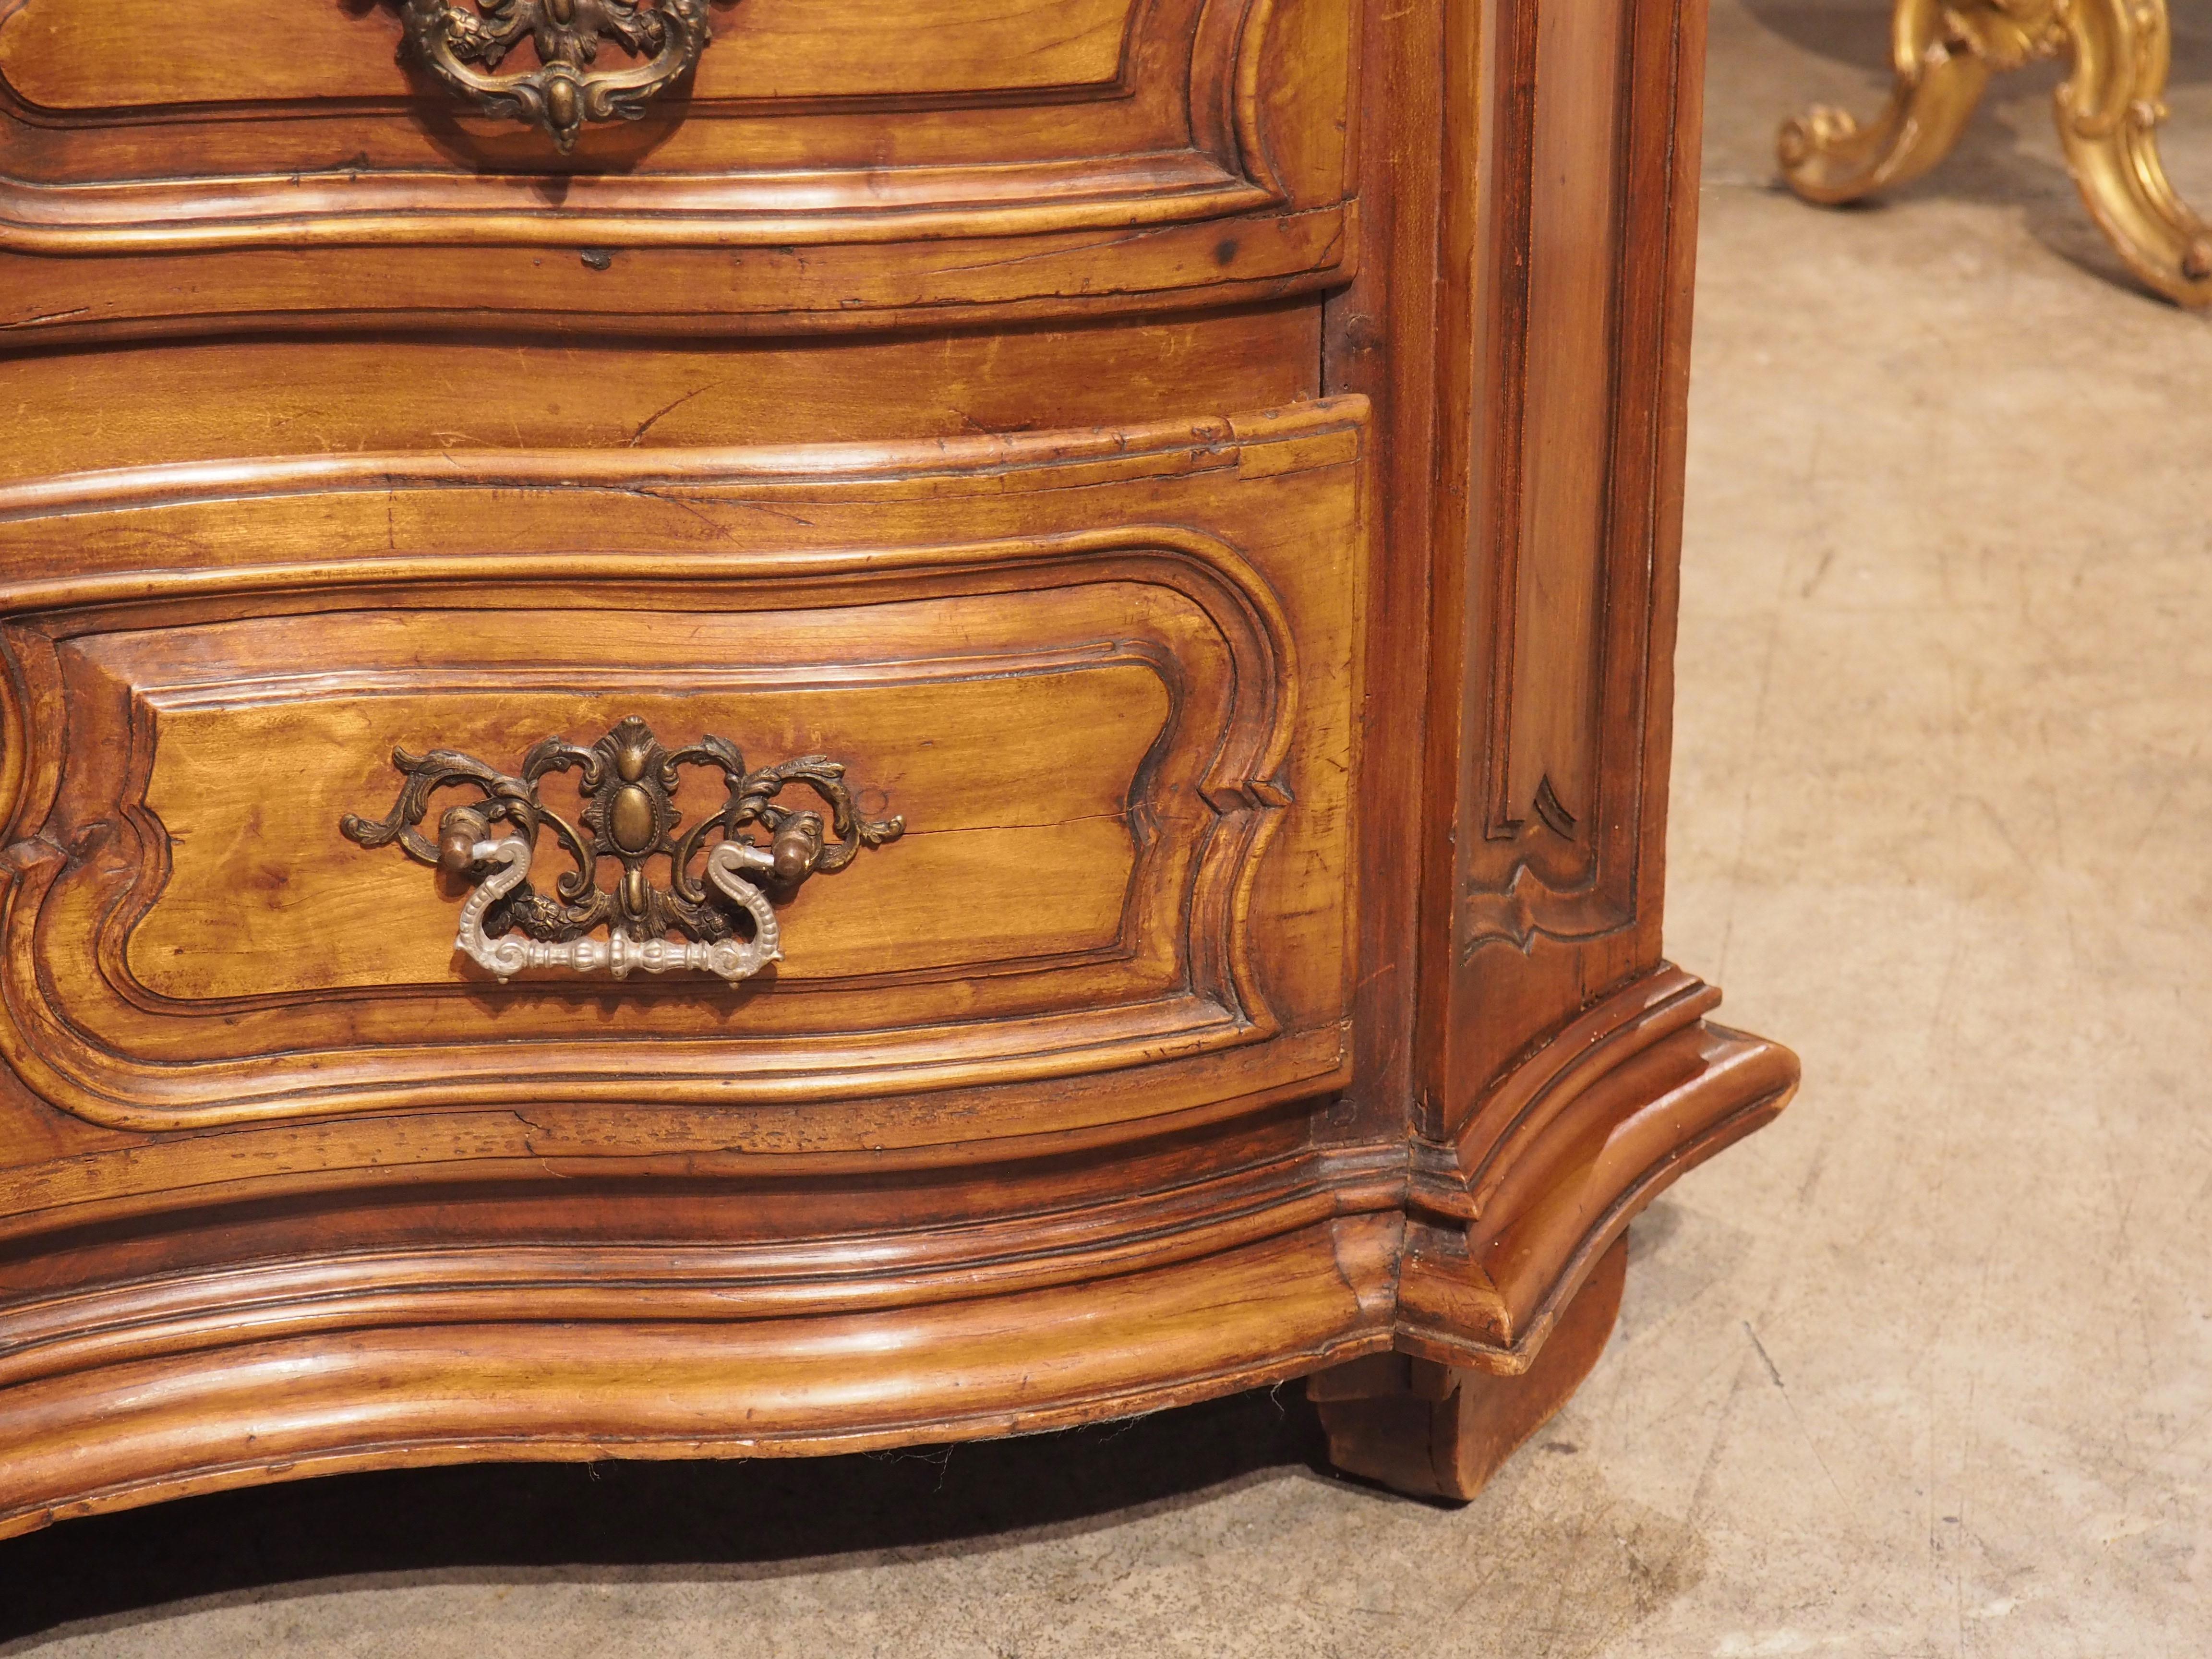 Hand-Carved Louis XIV Cherrywood Commode from France, Early 18th Century For Sale